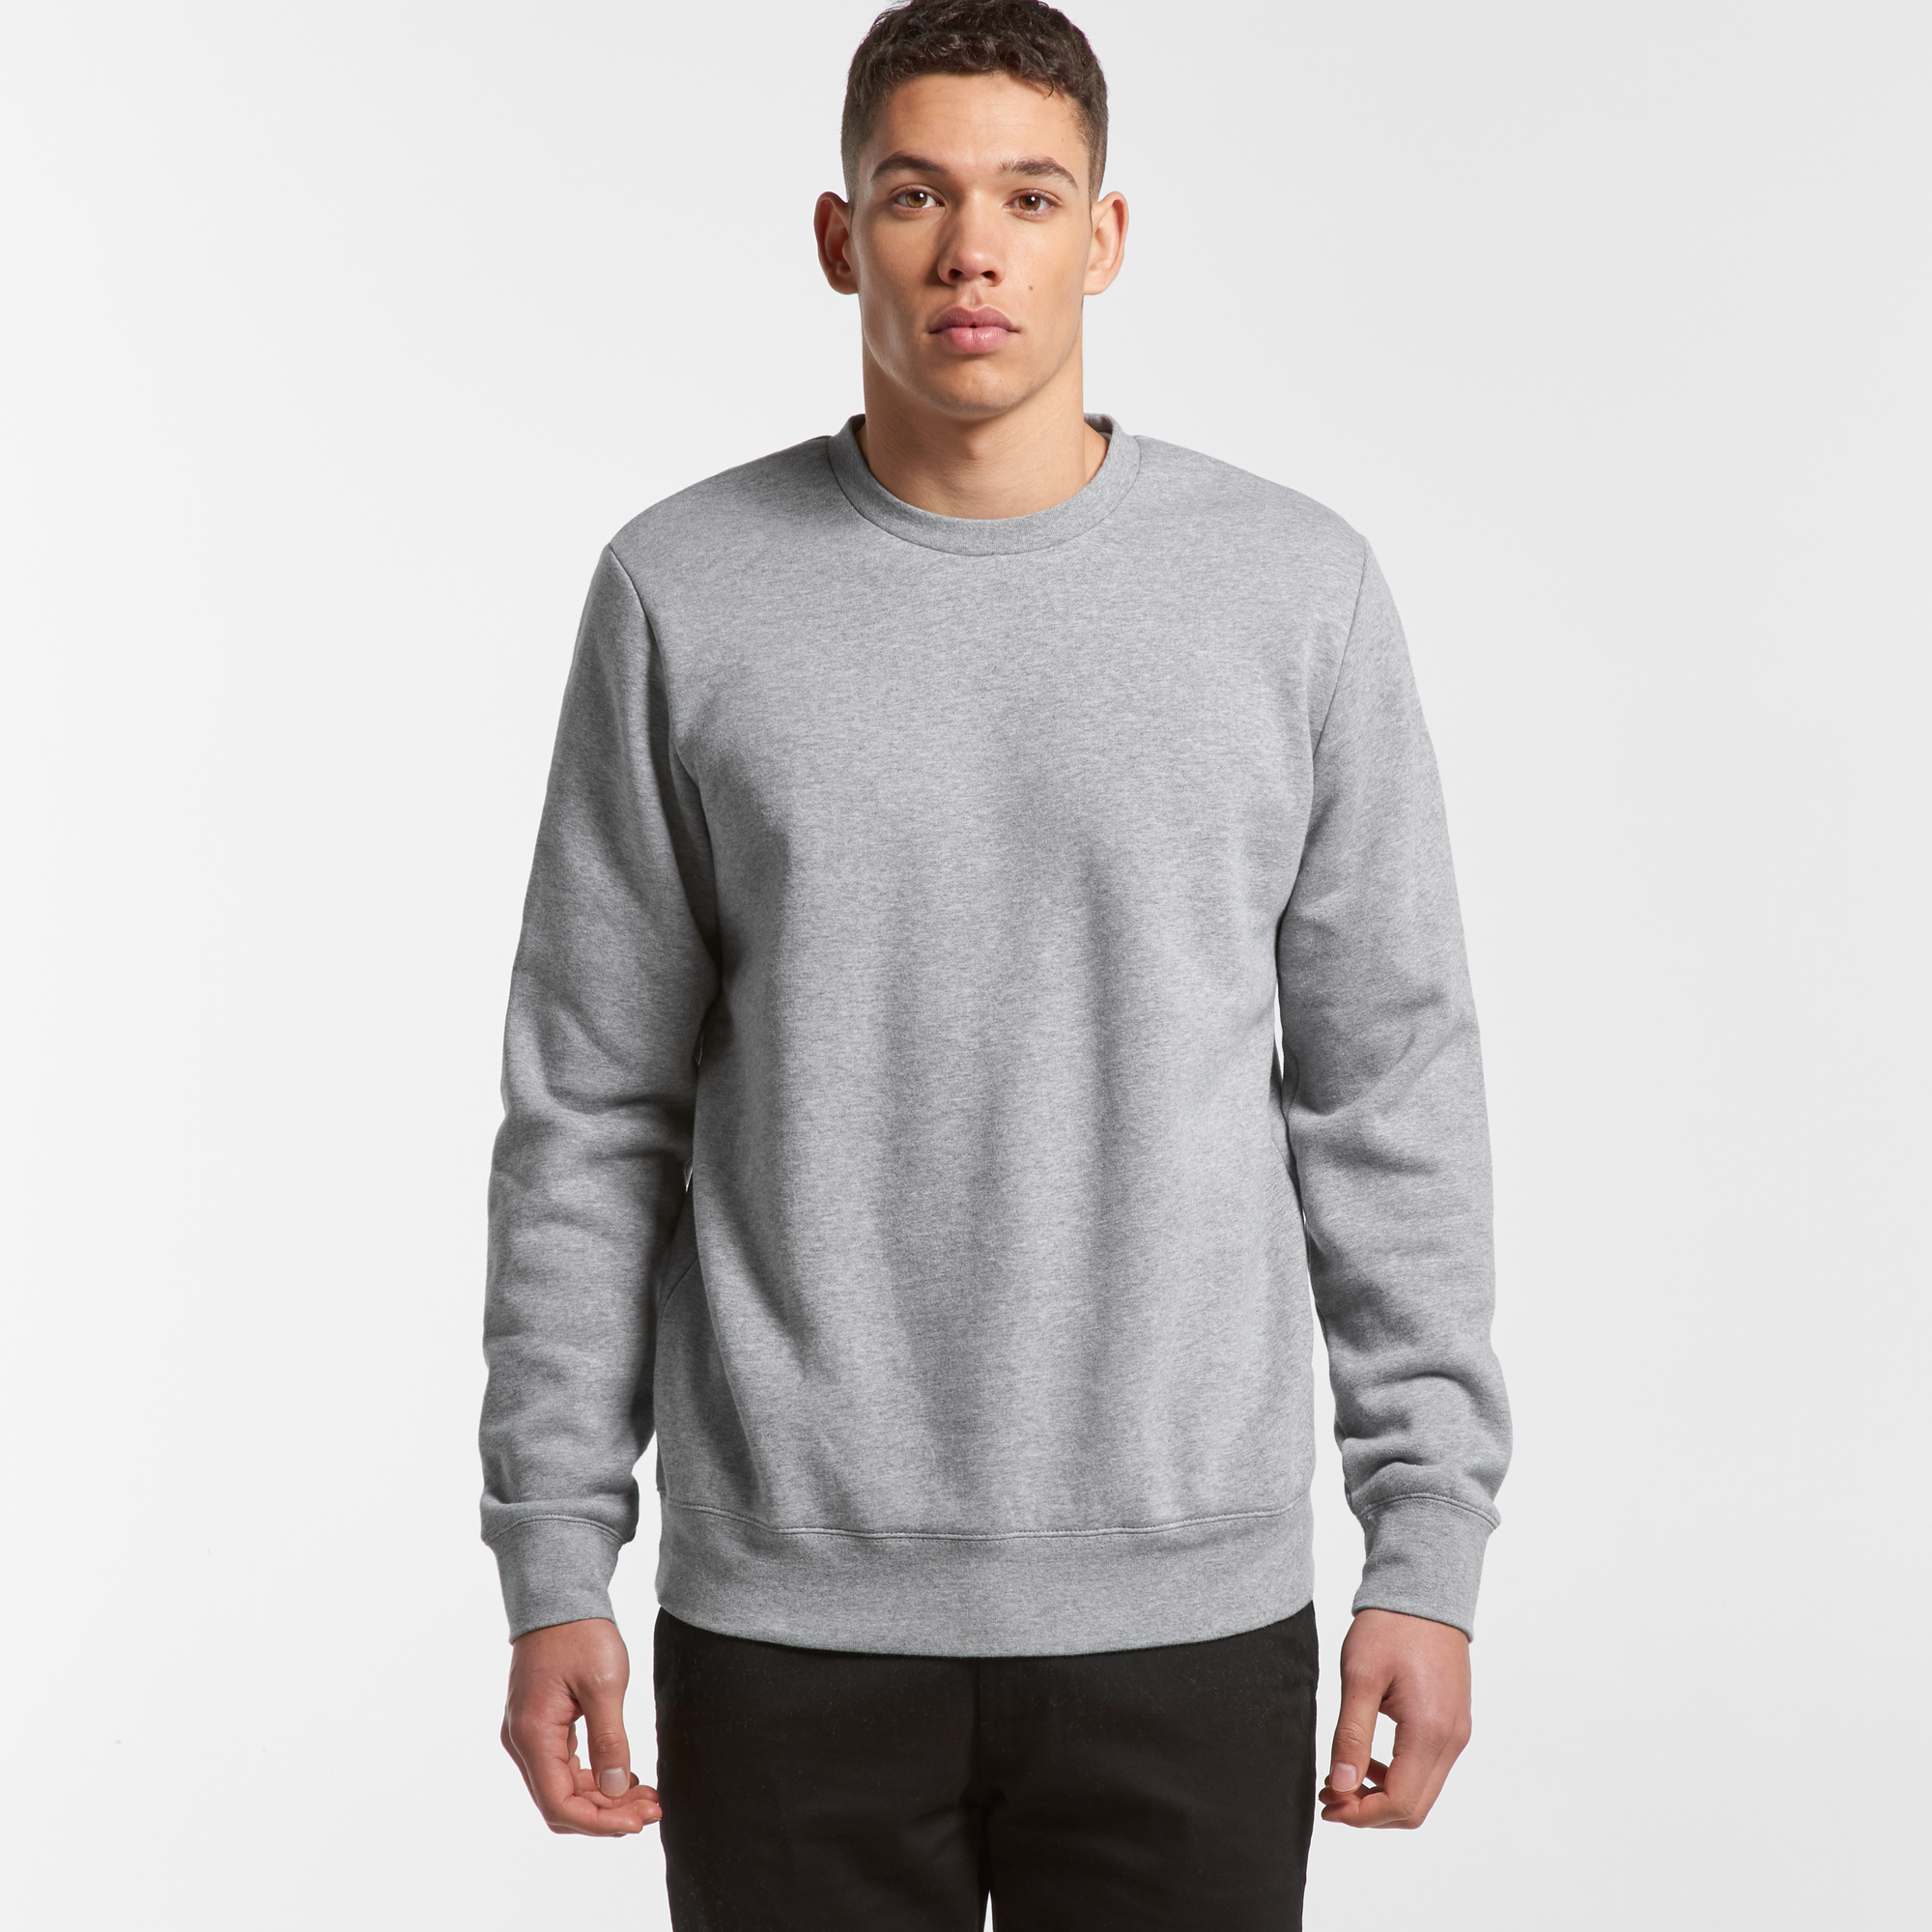 Men's United Crew | Branded United Crew | Printed United Crew NZ | AS Colour | Withers & Co